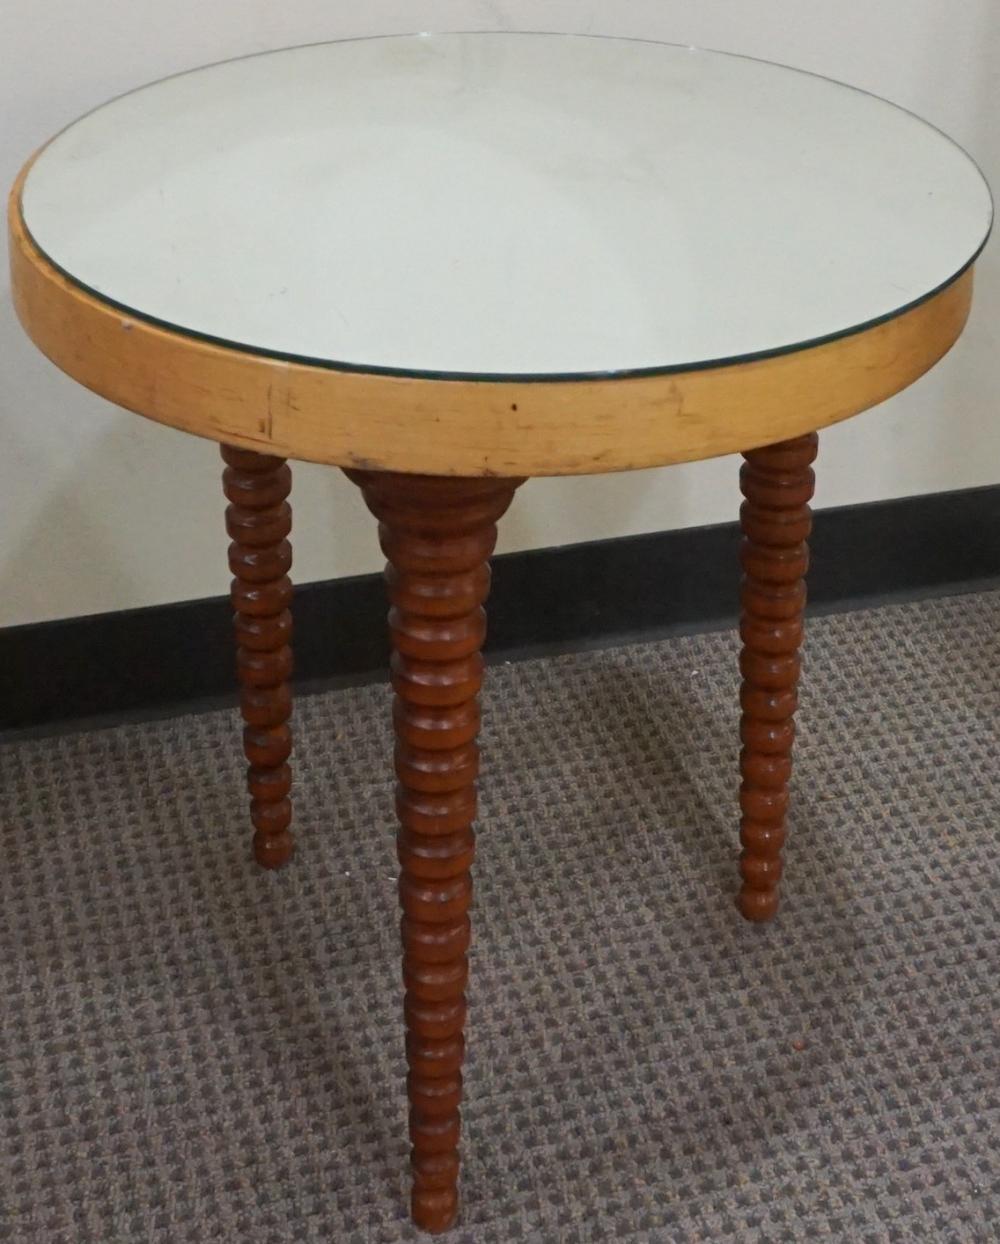 MODERN MIRROR TOP ROUND SIDE TABLE,